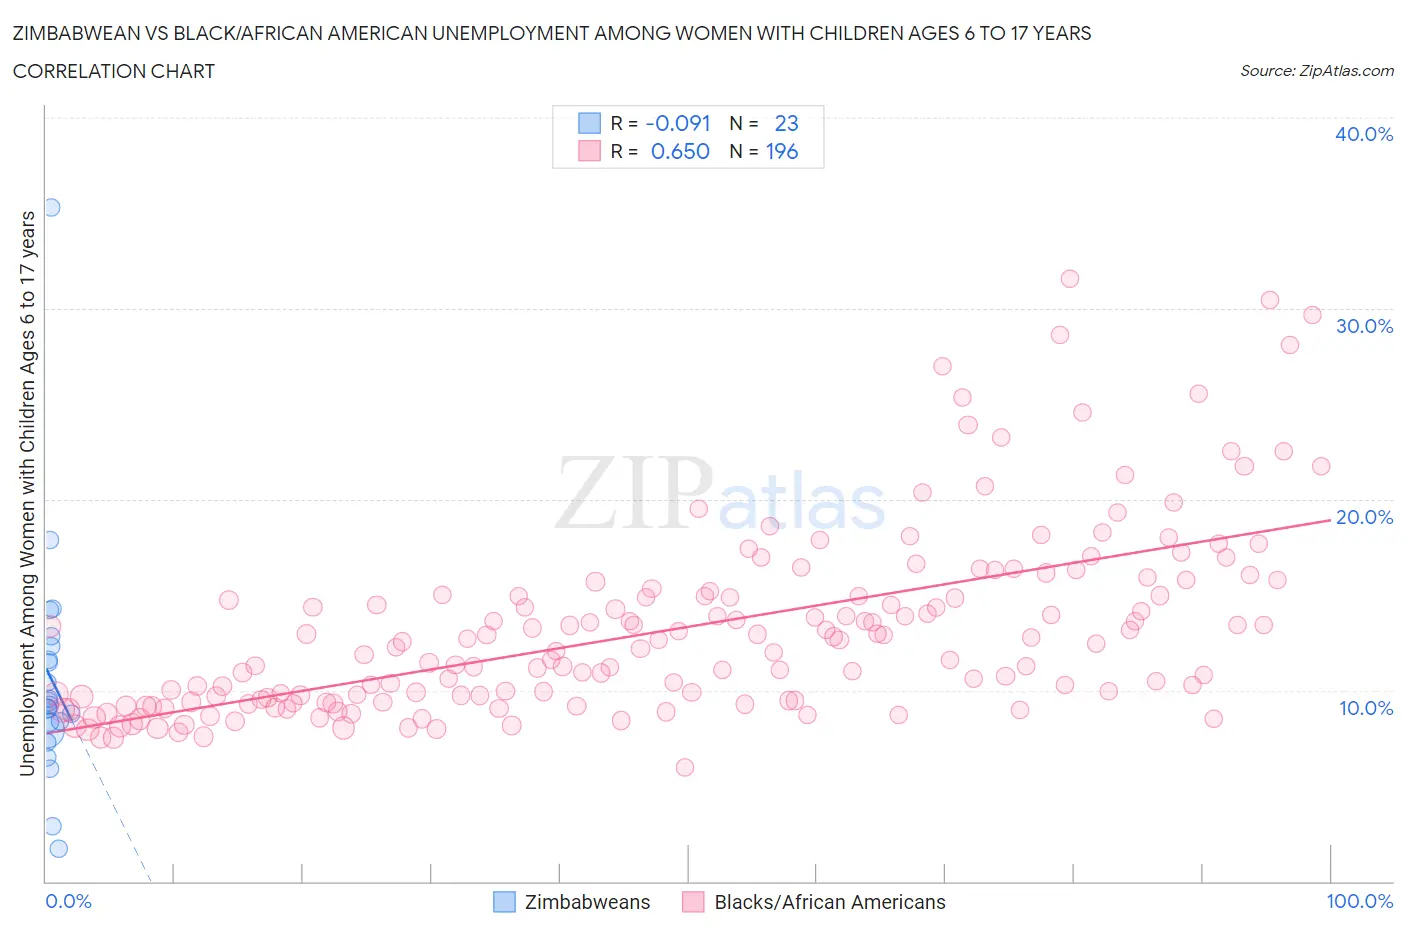 Zimbabwean vs Black/African American Unemployment Among Women with Children Ages 6 to 17 years